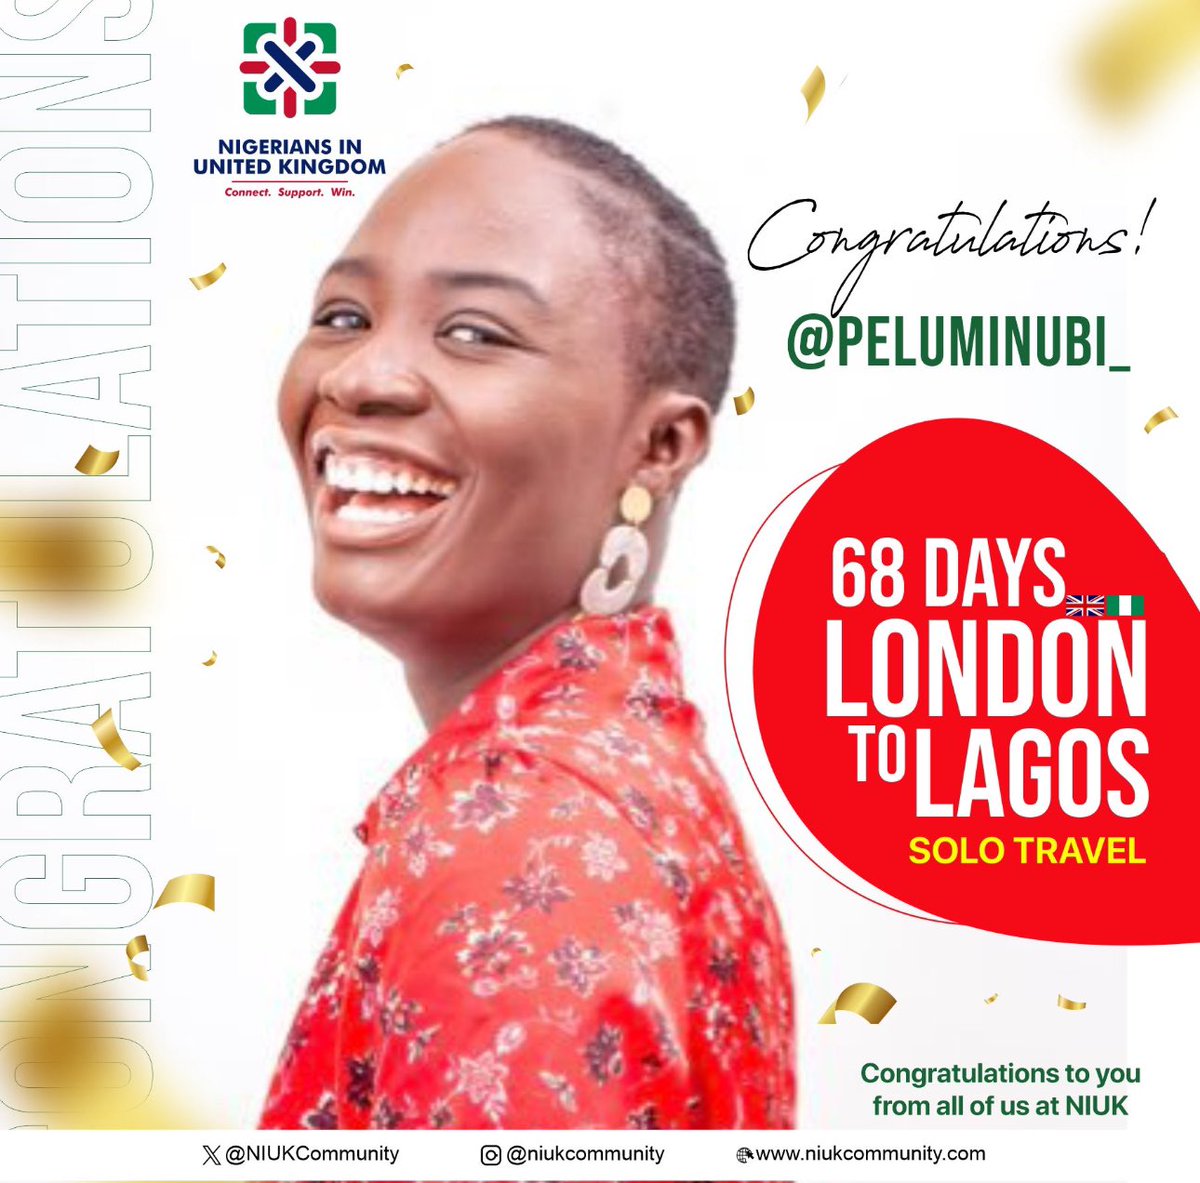 Huge congratulations to @Peluminubi_ on completing your incredible 68-day solo travel journey from London to Lagos. 🇬🇧✈️🇳🇬 Here's to many more amazing journeys ahead. Cheers from all of us at NIUK Community! 🎉 #TravelInspiration #NIUKCommunity.